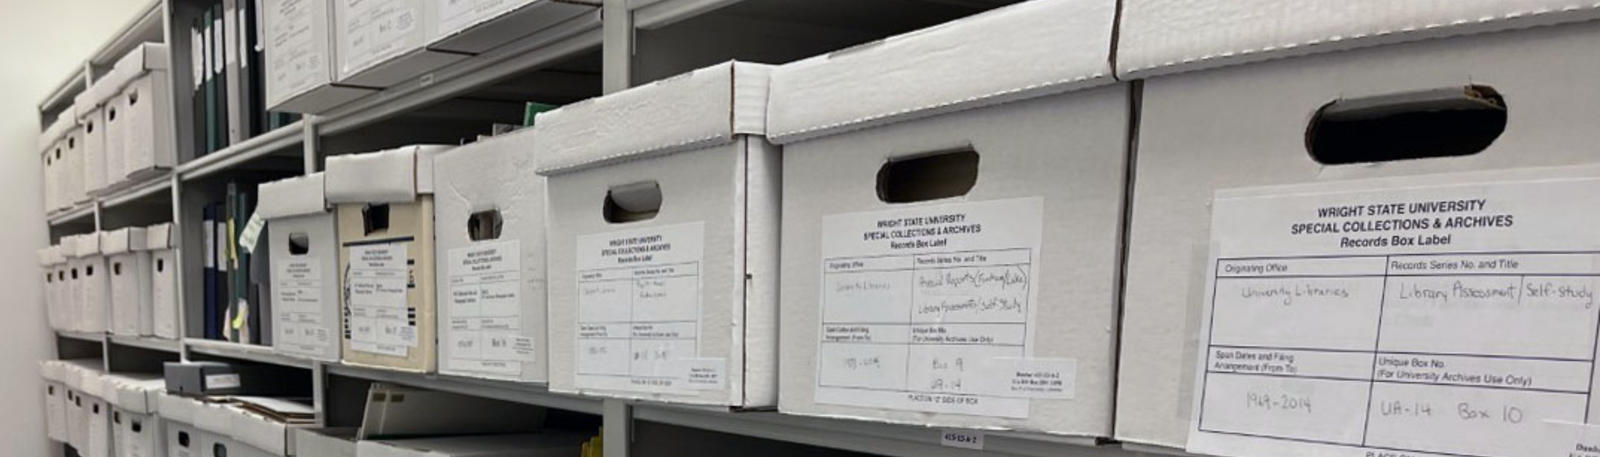 photo of boxes on shelves in the archives